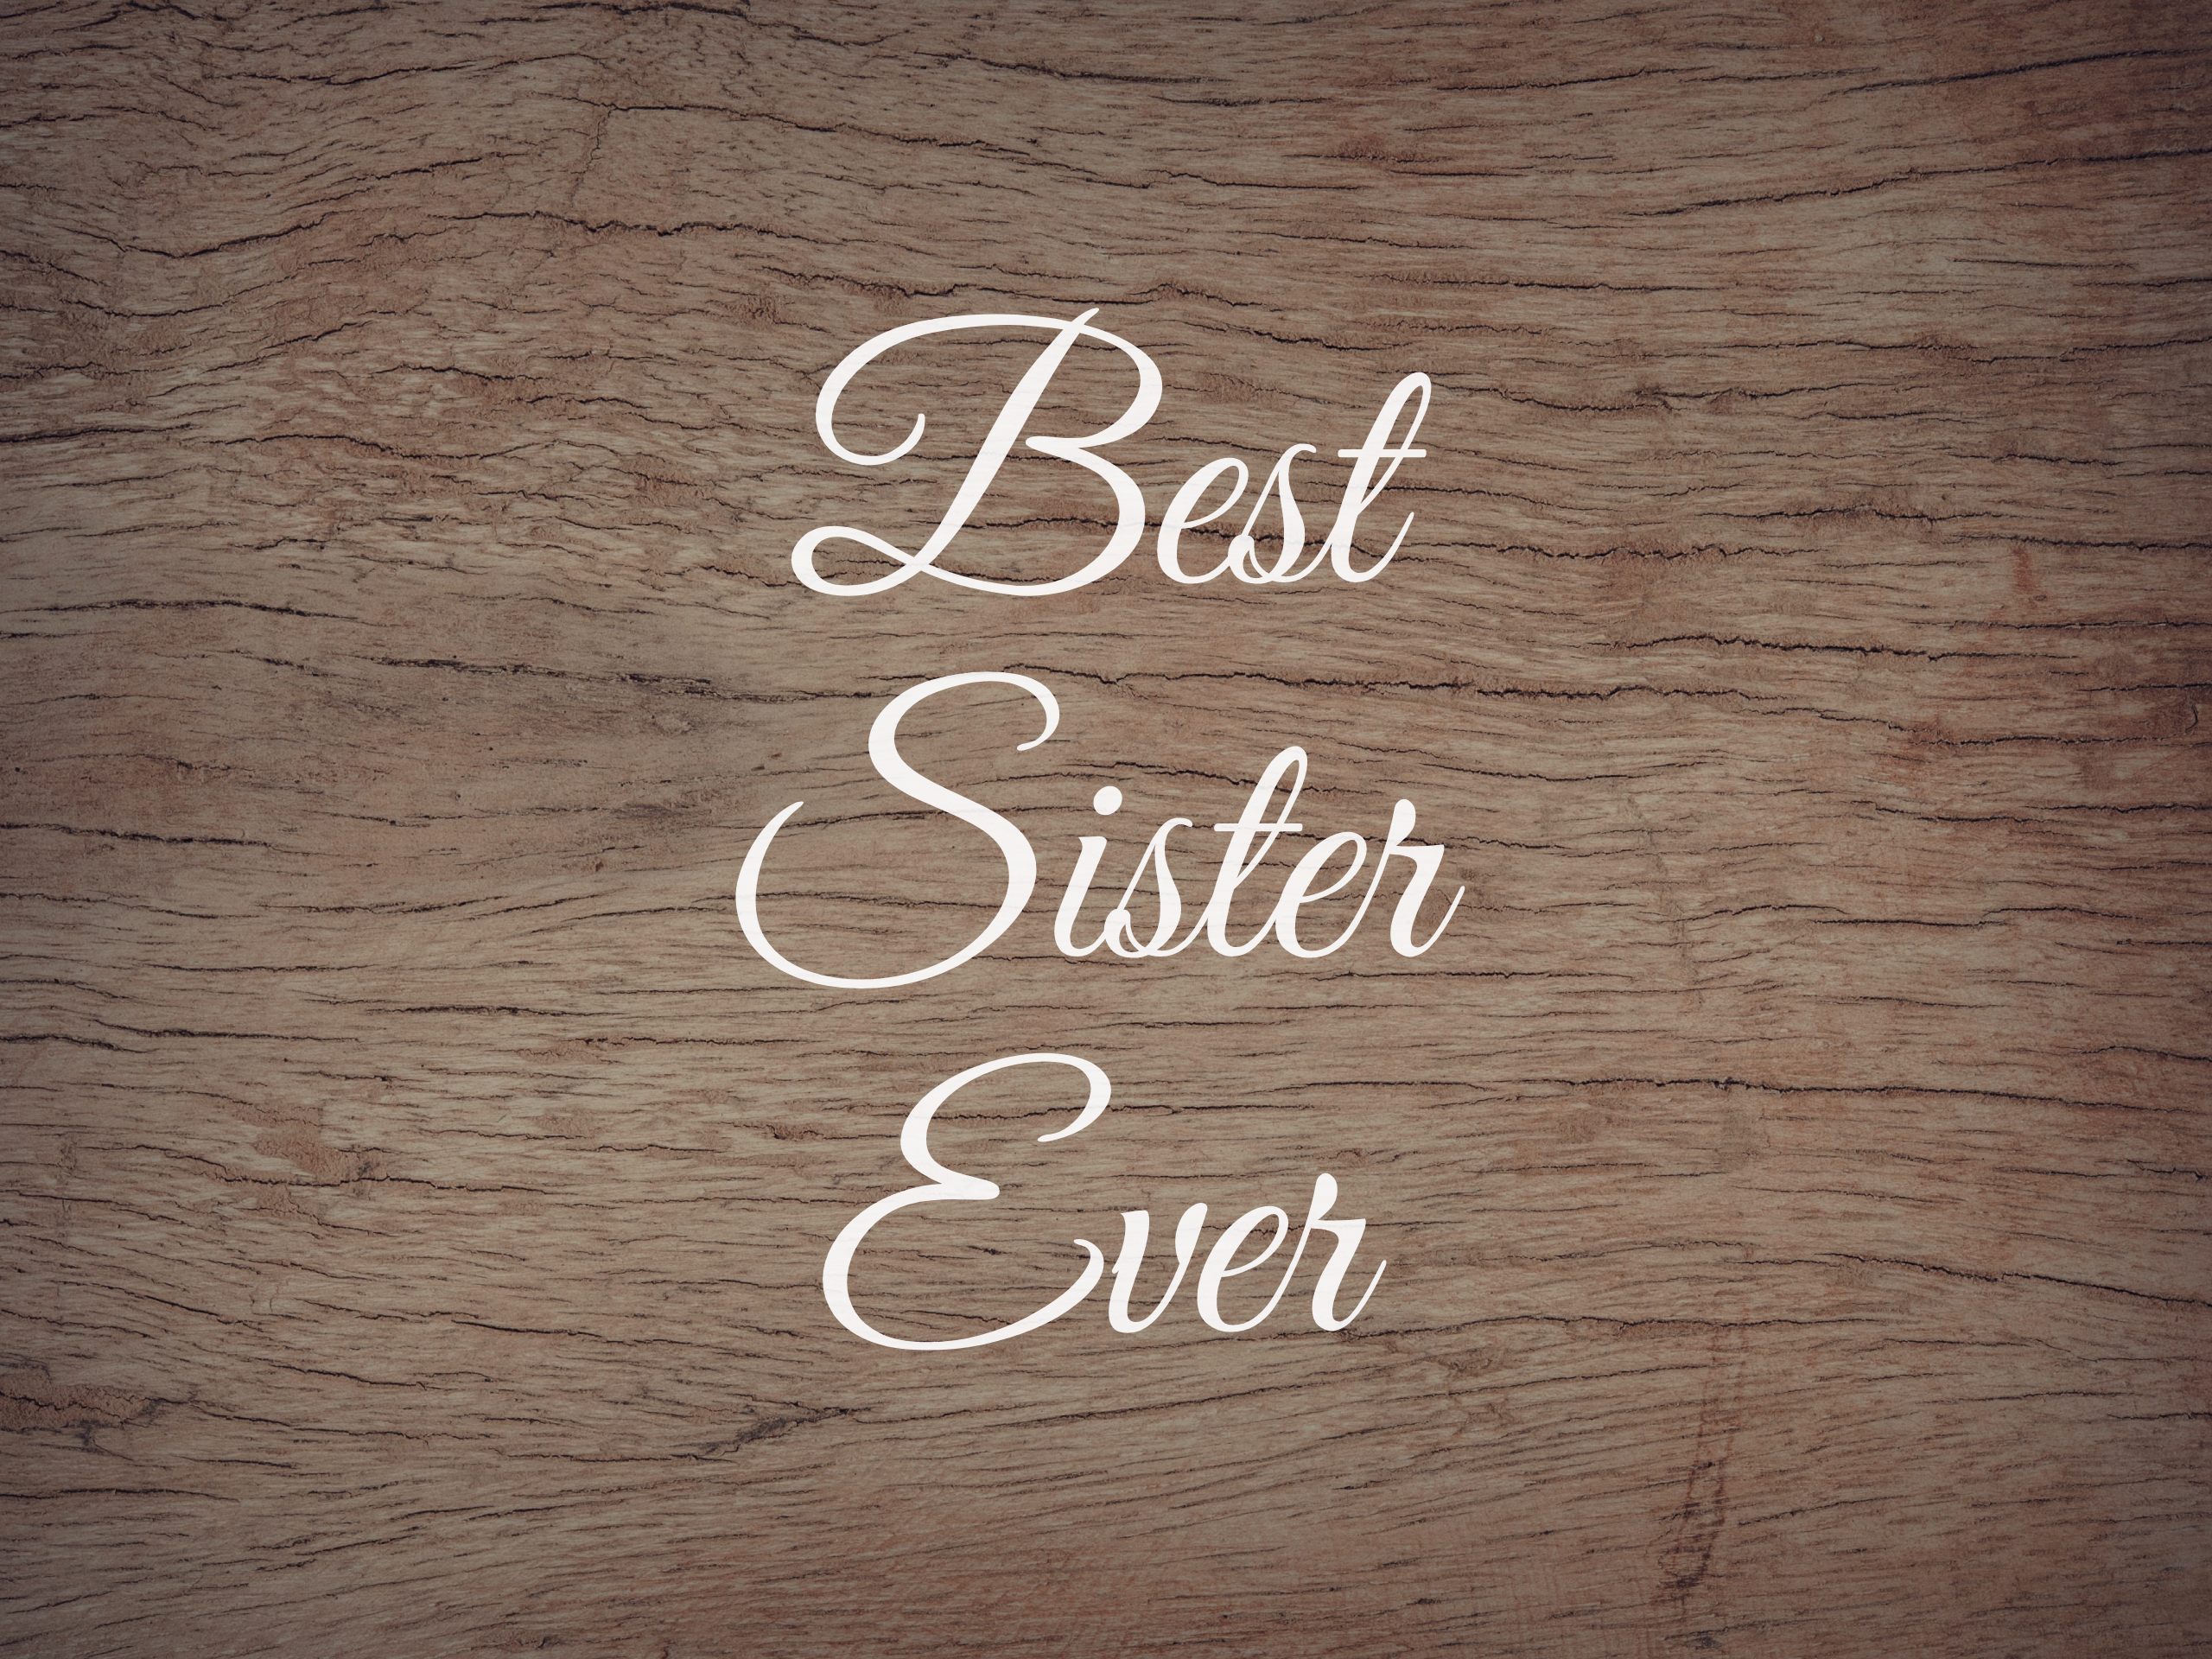 Best Sister Ever Decal - Holiday Sister/Aunt/Mother/Mom Vinyl Decals for Home, Gifts, Businesses and More!